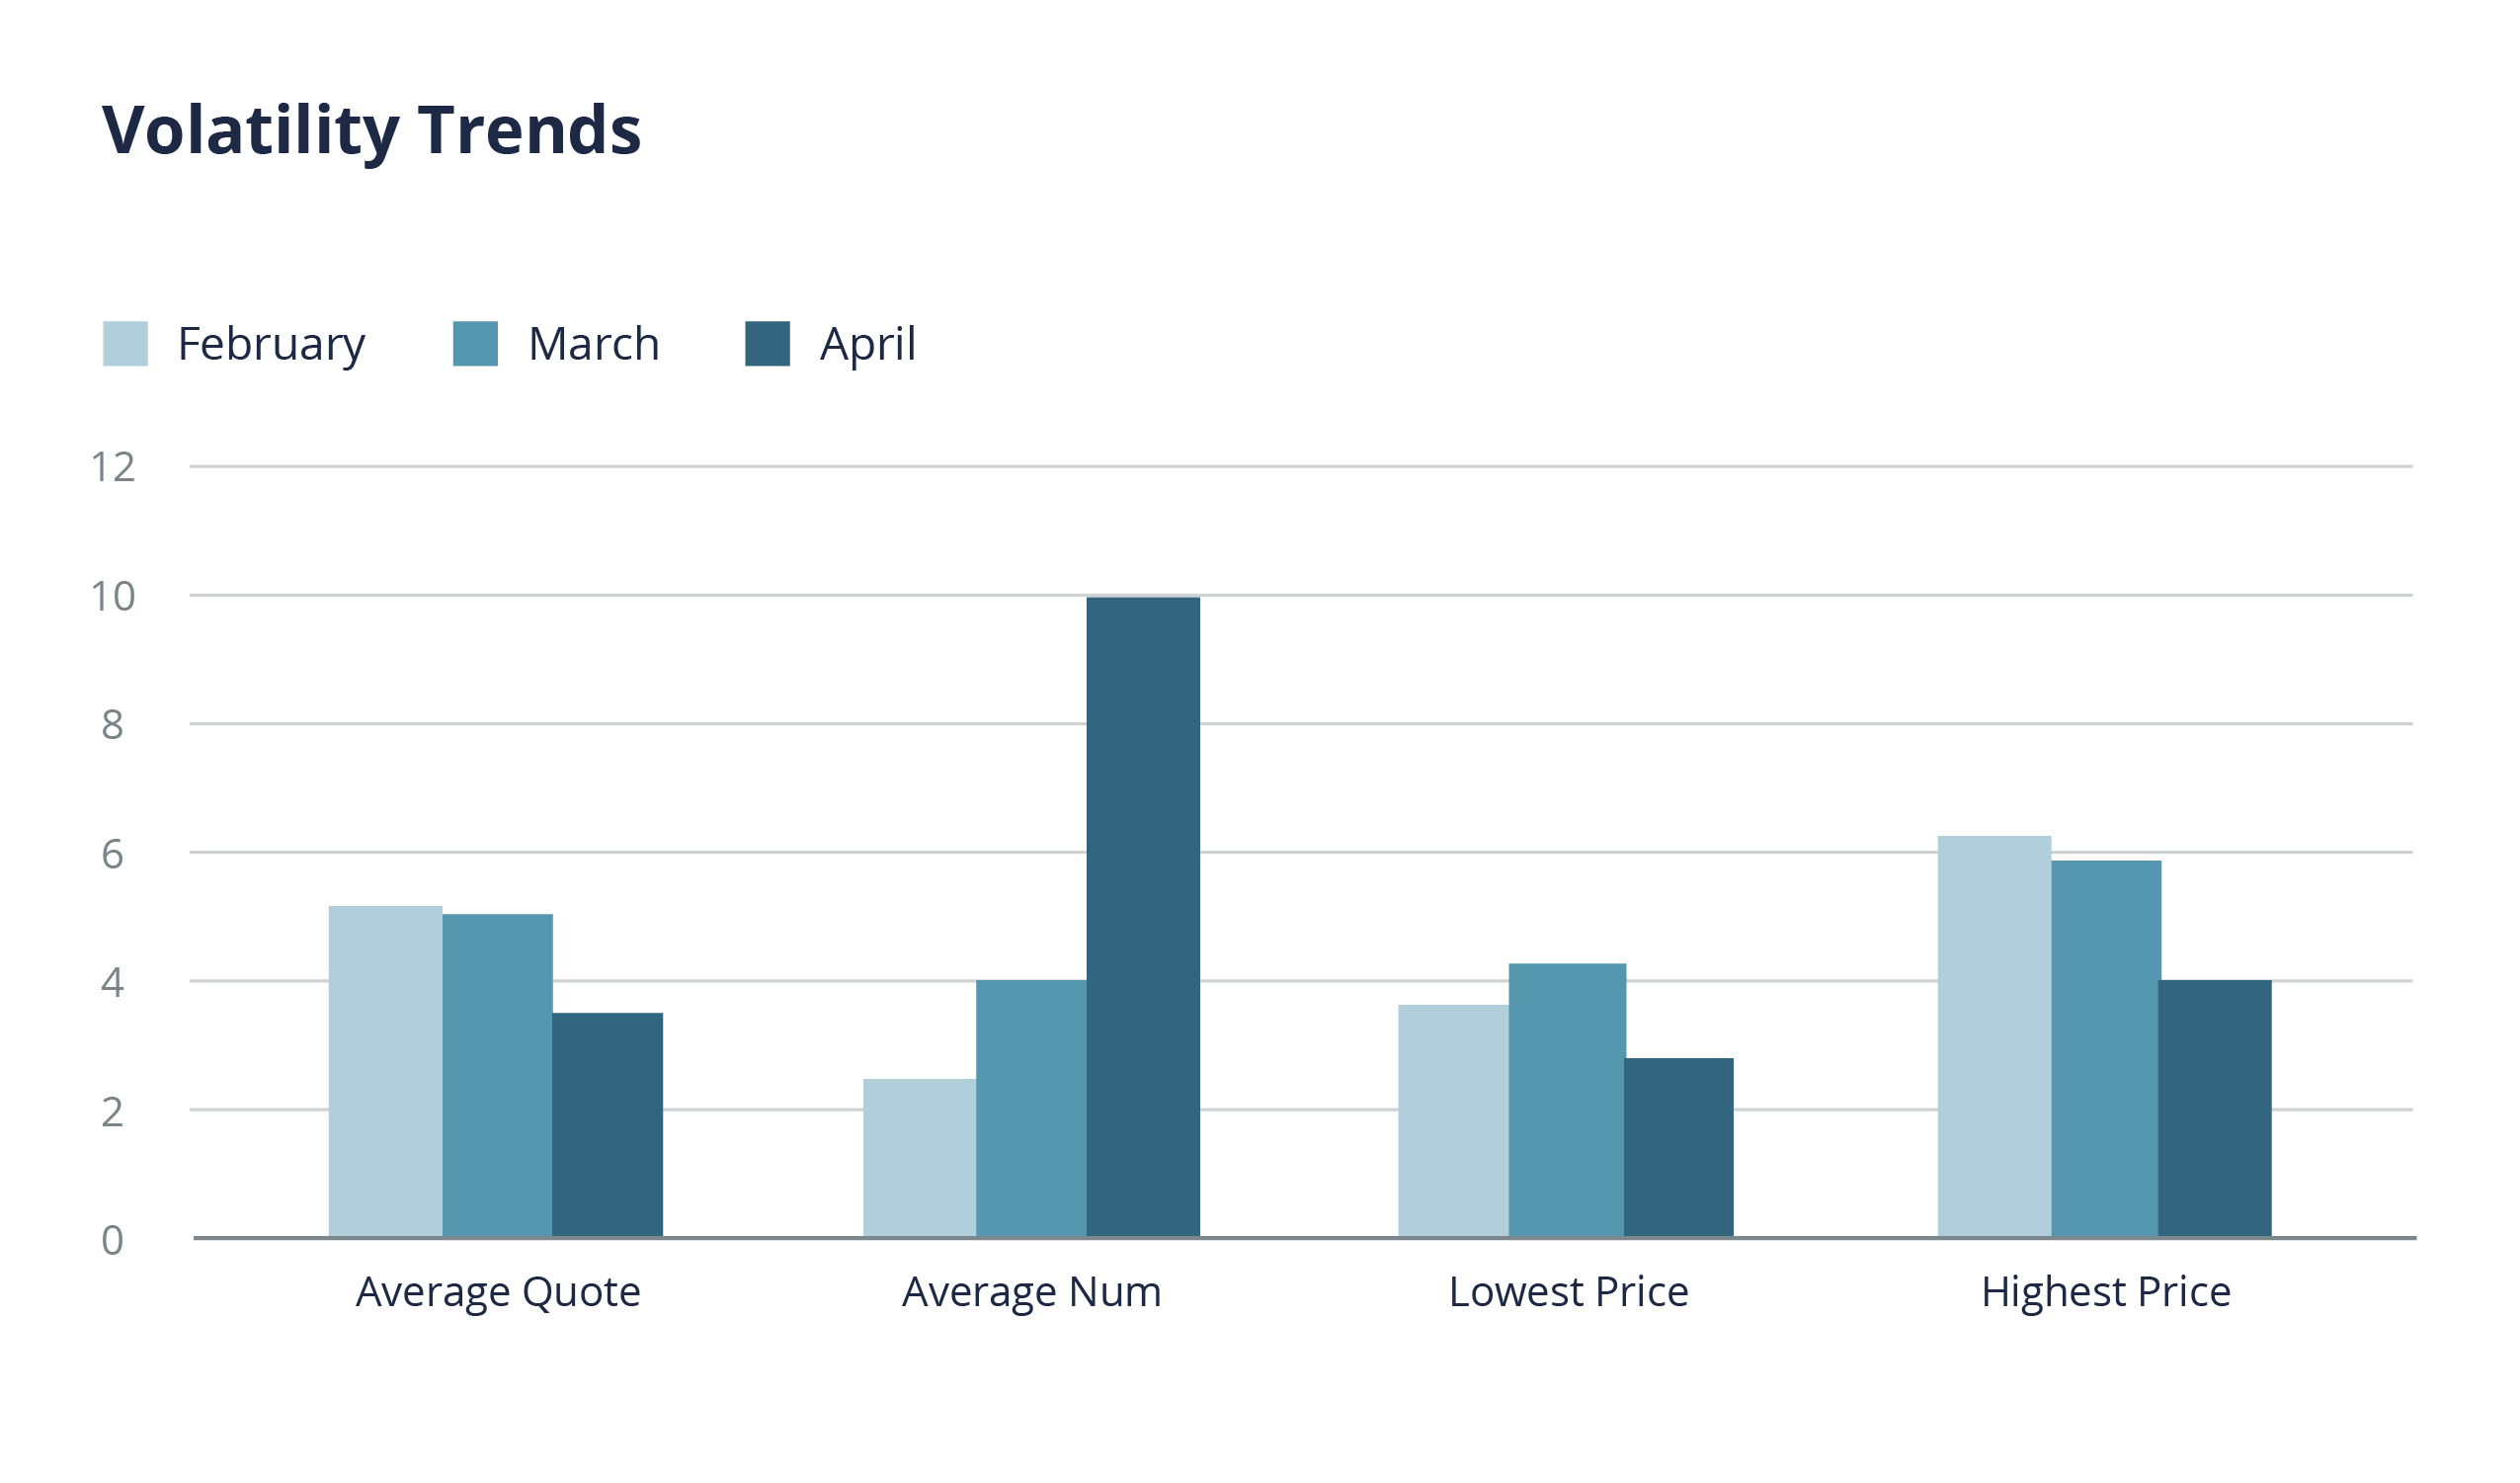 A bar graph of volatility trends in February, March, and April 2022 shows the average quote price dropped to 3.5% in April after being steady just above 5% the previous two months, the average number of quotes increased from 4 in March to 10 in April, and the lowest and highest April prices were below prior months.